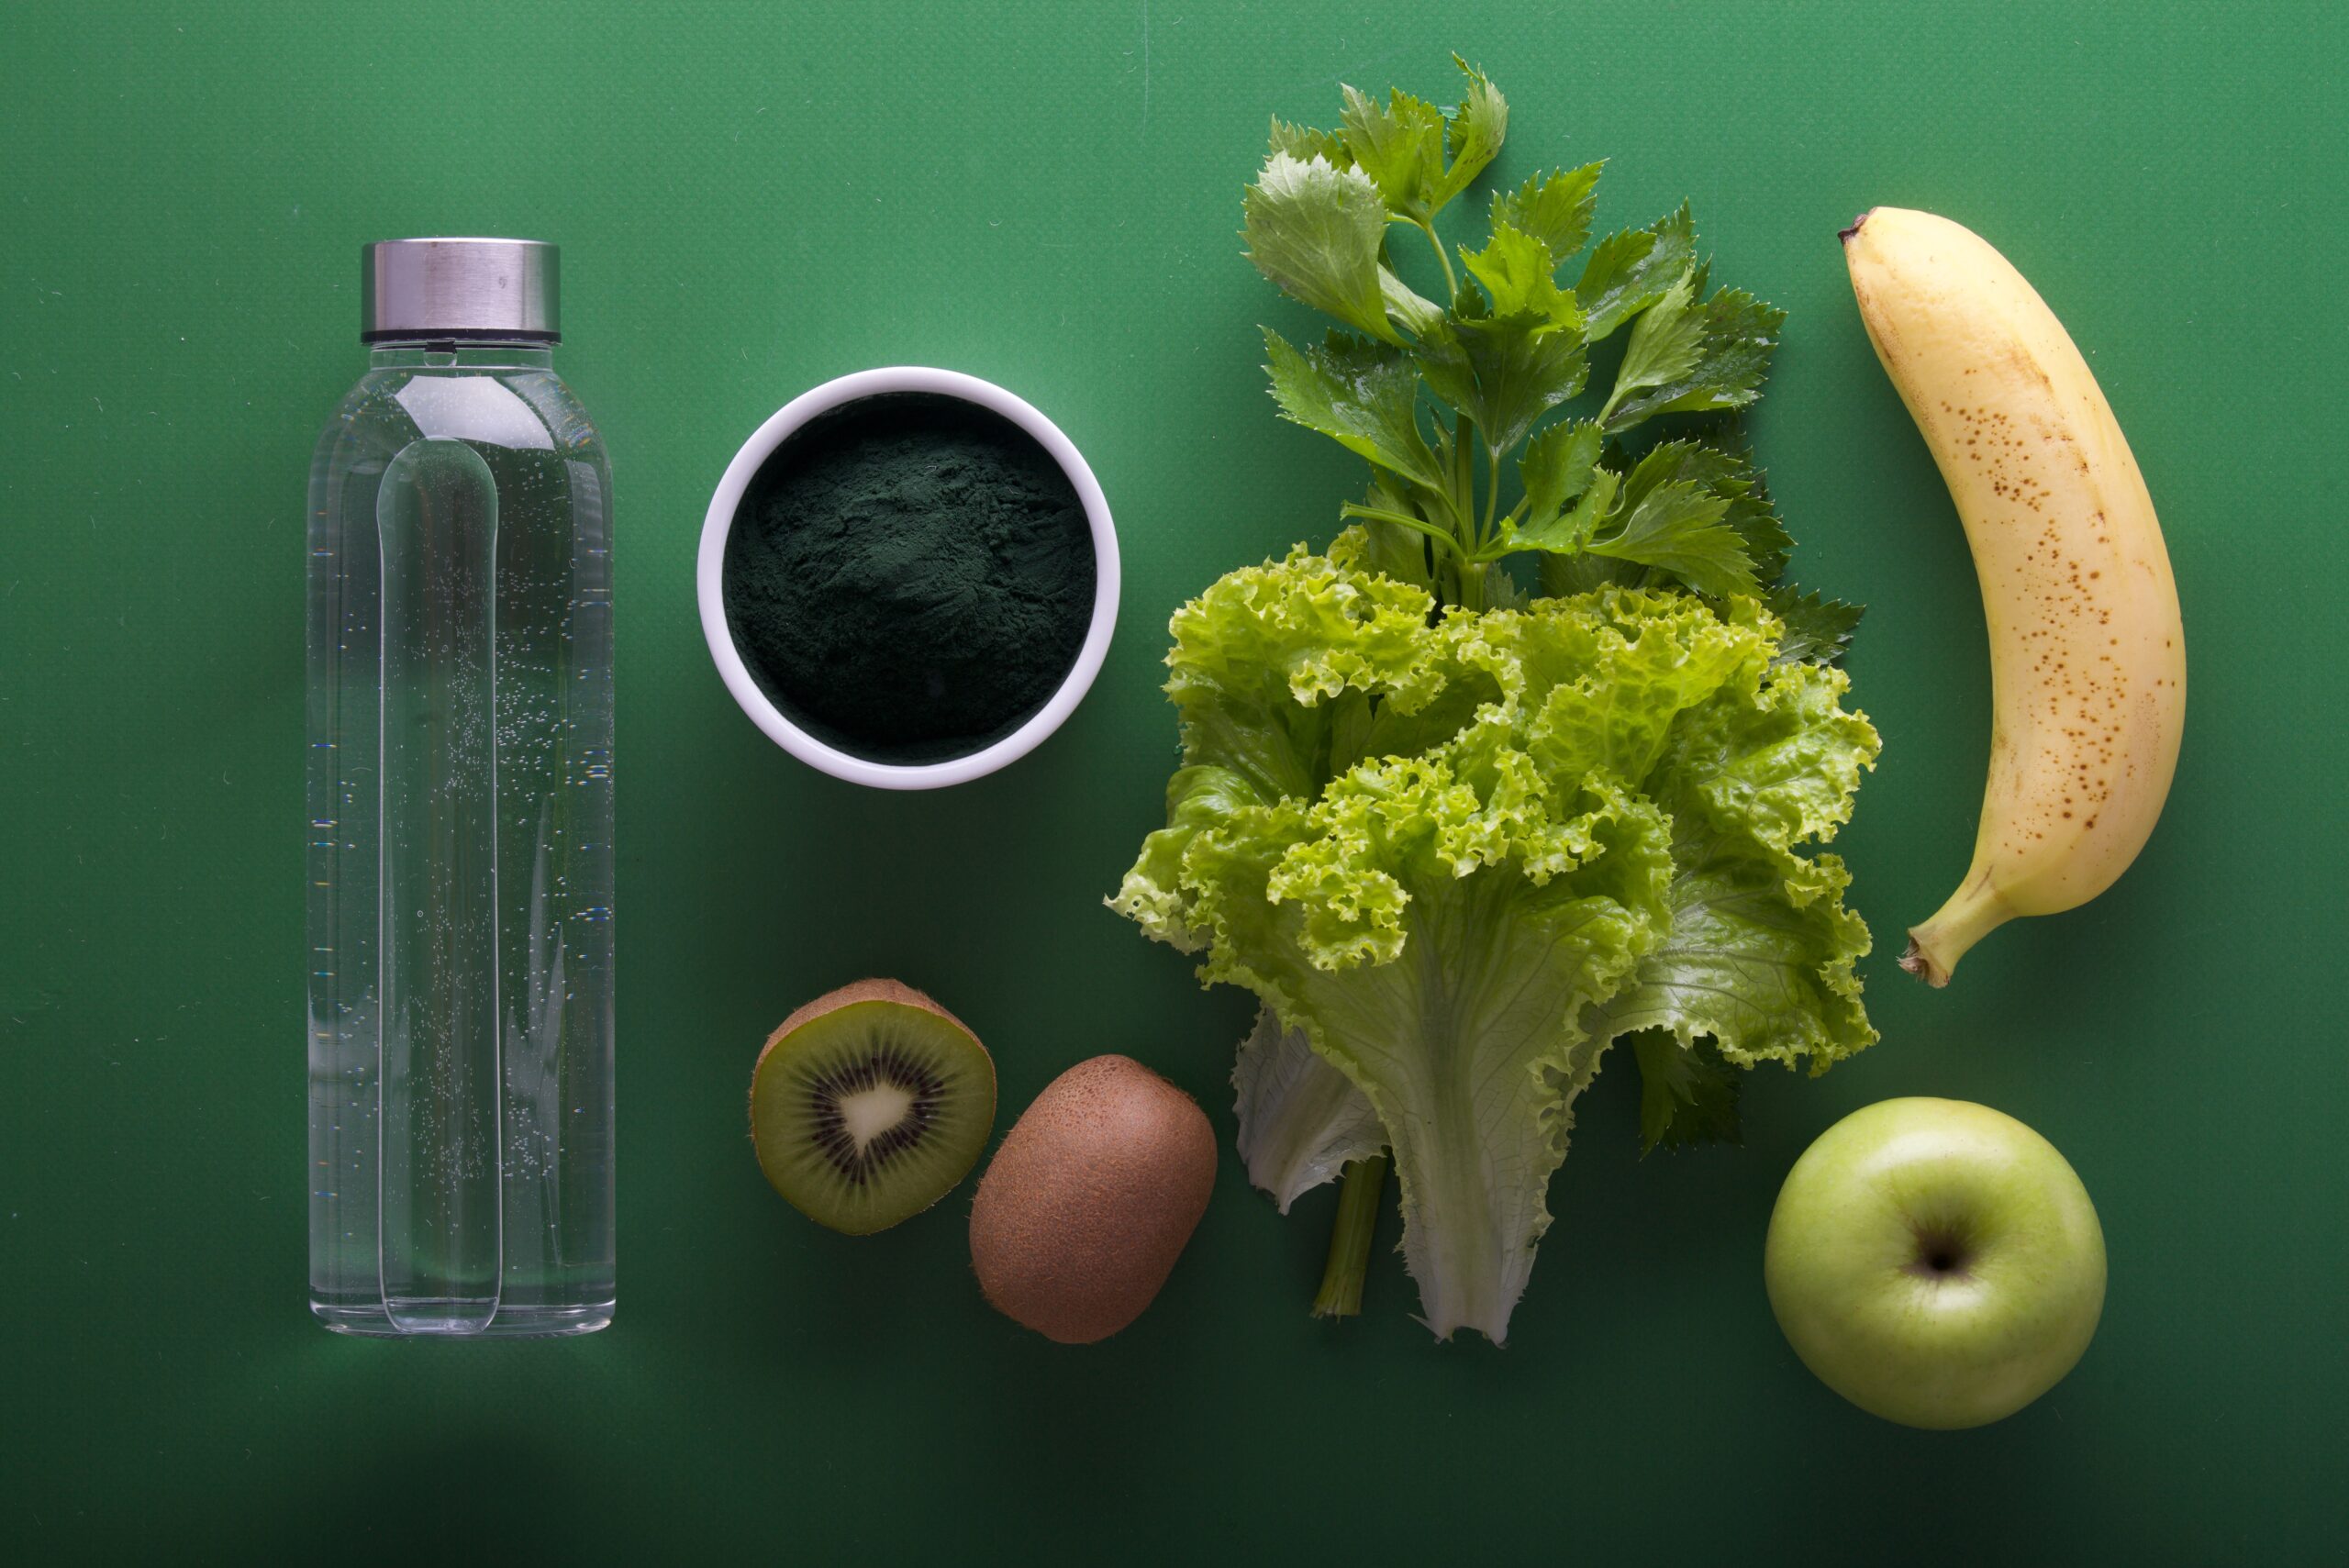 green and yellow fruit and vegetables and a bottle of water on a green background